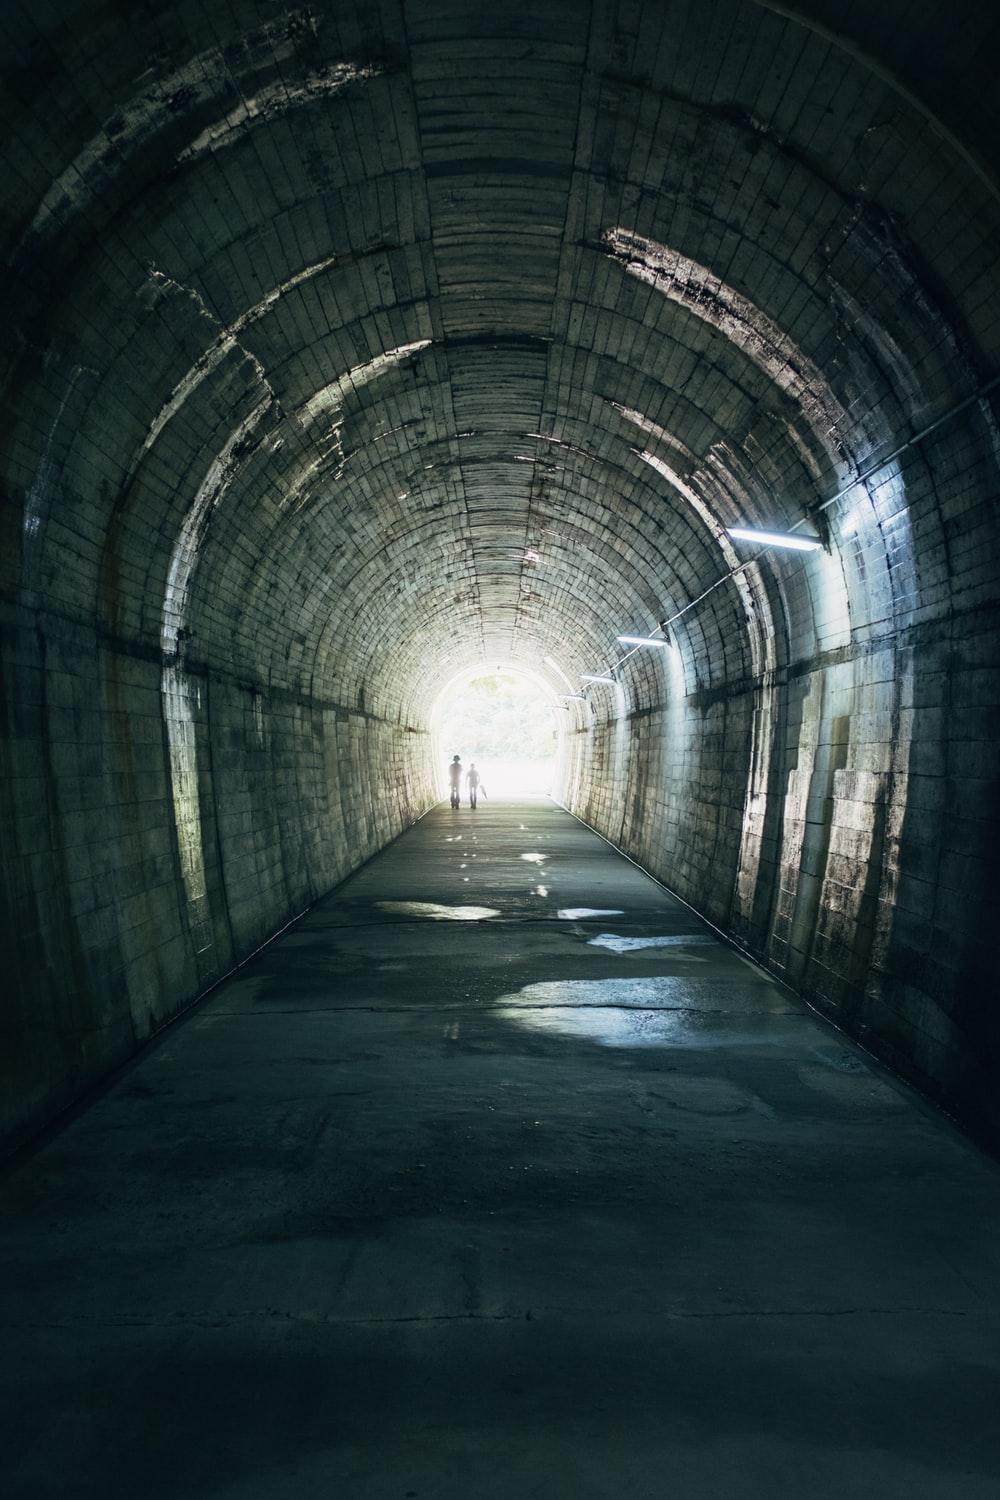 Tunnel Picture. Download Free Image